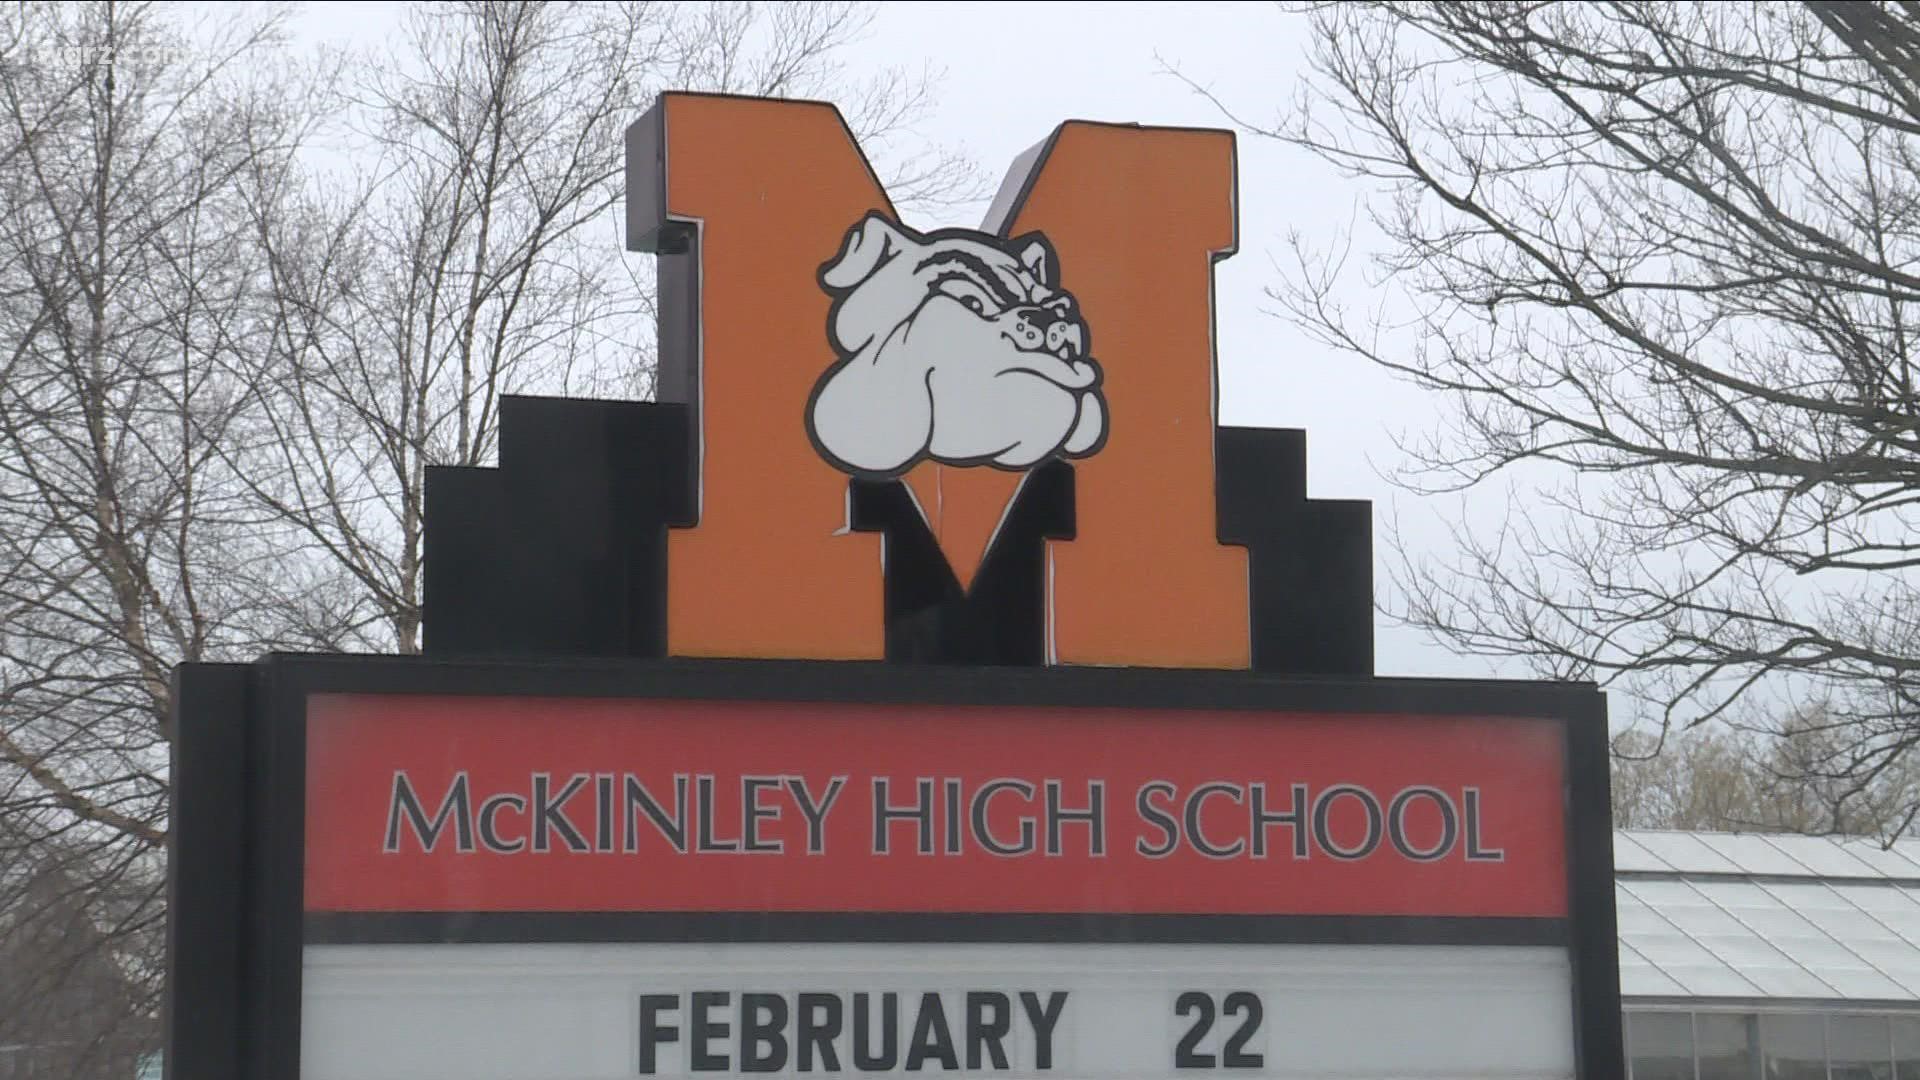 In-person instruction for McKinley High students will resume Feb. 28 for seniors, March 1 for juniors, and March 2 for sophomores and freshmen.